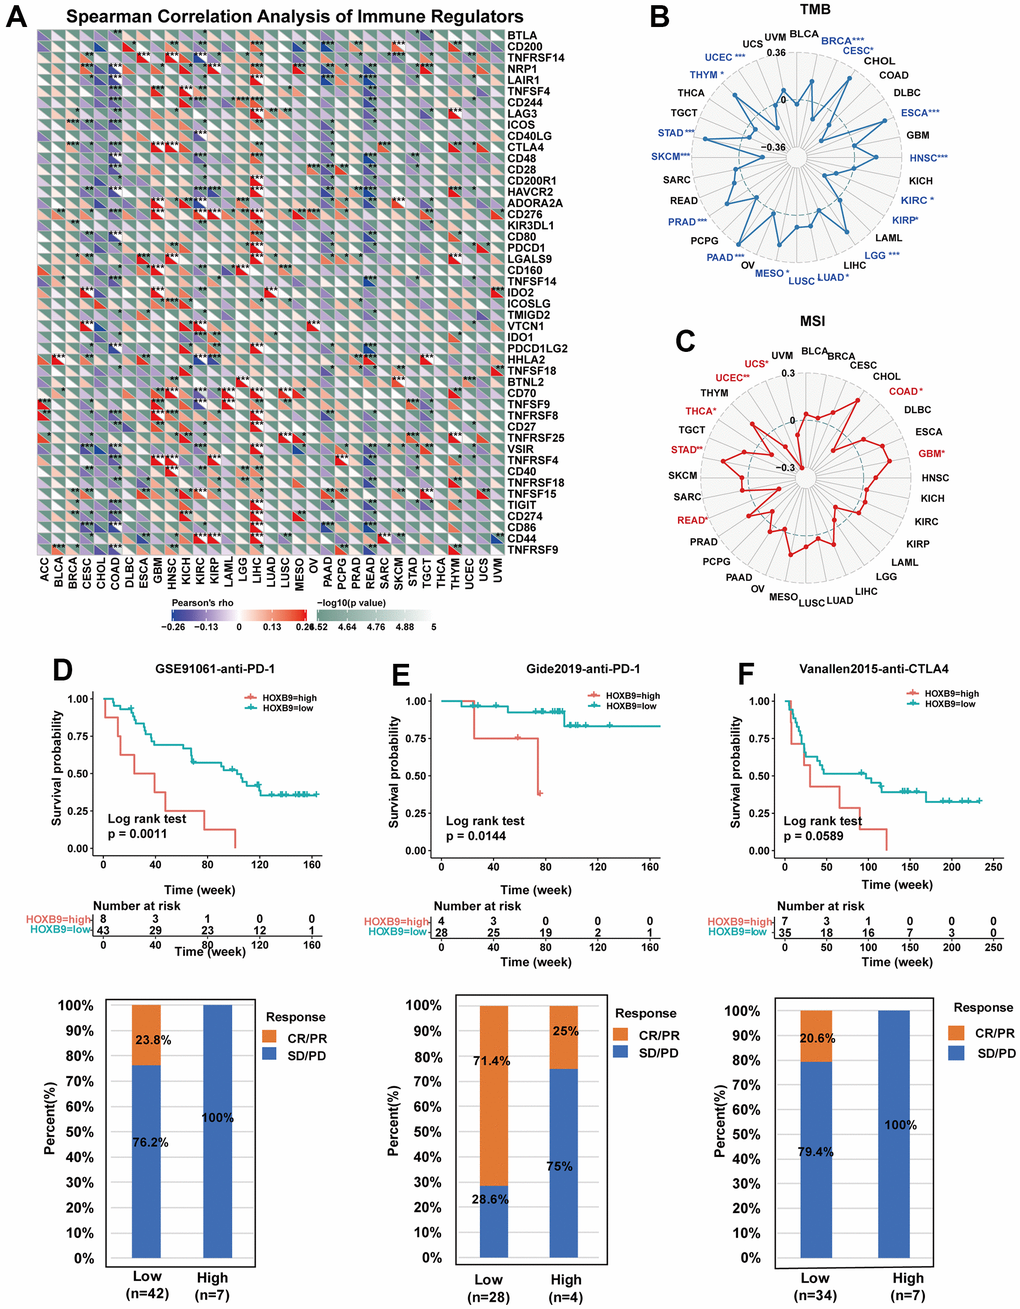 Correlation between HOXB9 and immune regulators, TMB, and MSI. (A) The Spearman correlation heatmap depicts the correlations between the HOXB9 expressions and the different types of immune regulators in pan-cancer. A positive correlation is represented by red, while a negative correlation is represented by blue. (B) Radar map of the correlation between HOXB9 expression and the TMB in pan-cancer. (C) Radar map of the correlation between HOXB9 expression and MSI in pan-cancer. (D) Kaplan-Meier curves for low- and high-HOXB9 patient groups in GSE91061 (anti-PD-1 therapy), and the fraction of melanoma patients responding to anti-PD-1 therapy in low- and high-HOXB9 subgroups of GSE91061. (E) Kaplan-Meier curves for low- and high-HOXB9 patient groups in the Gide2019 cohort (anti-PD-1 and anti-CTLA4 therapy), and the fraction of melanoma tumors patients with response to a combination of anti-PD-1 and anti-CTLA4 therapy in low- and high-HOXB9 subgroups of Gide2019 cohort. (F) Kaplan-Meier curves for low- and high-HOXB9 expression groups from the Vanallen2015 cohort receiving anti-CTLA4 immunotherapy, and proportion of patients with therapeutic response to anti-CTLA4 blockade immunotherapy in low- and high-HOXB9 expression Vanallen2015 cohorts. *P P P 